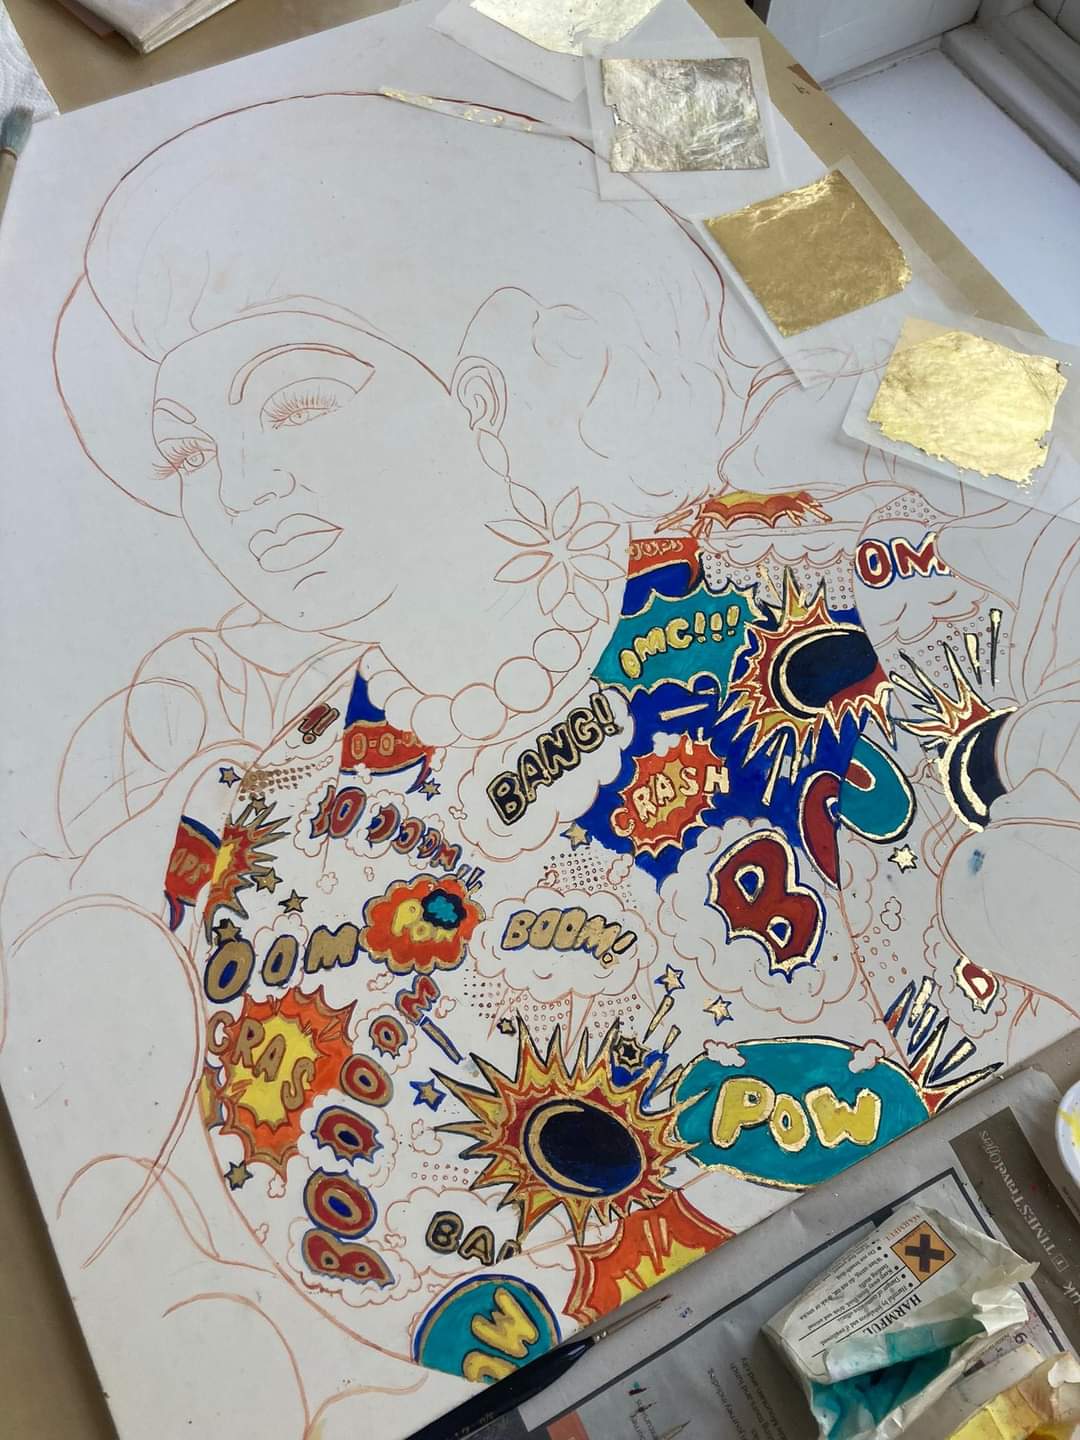 Paint and gold leaf applied to the unfinished portrait